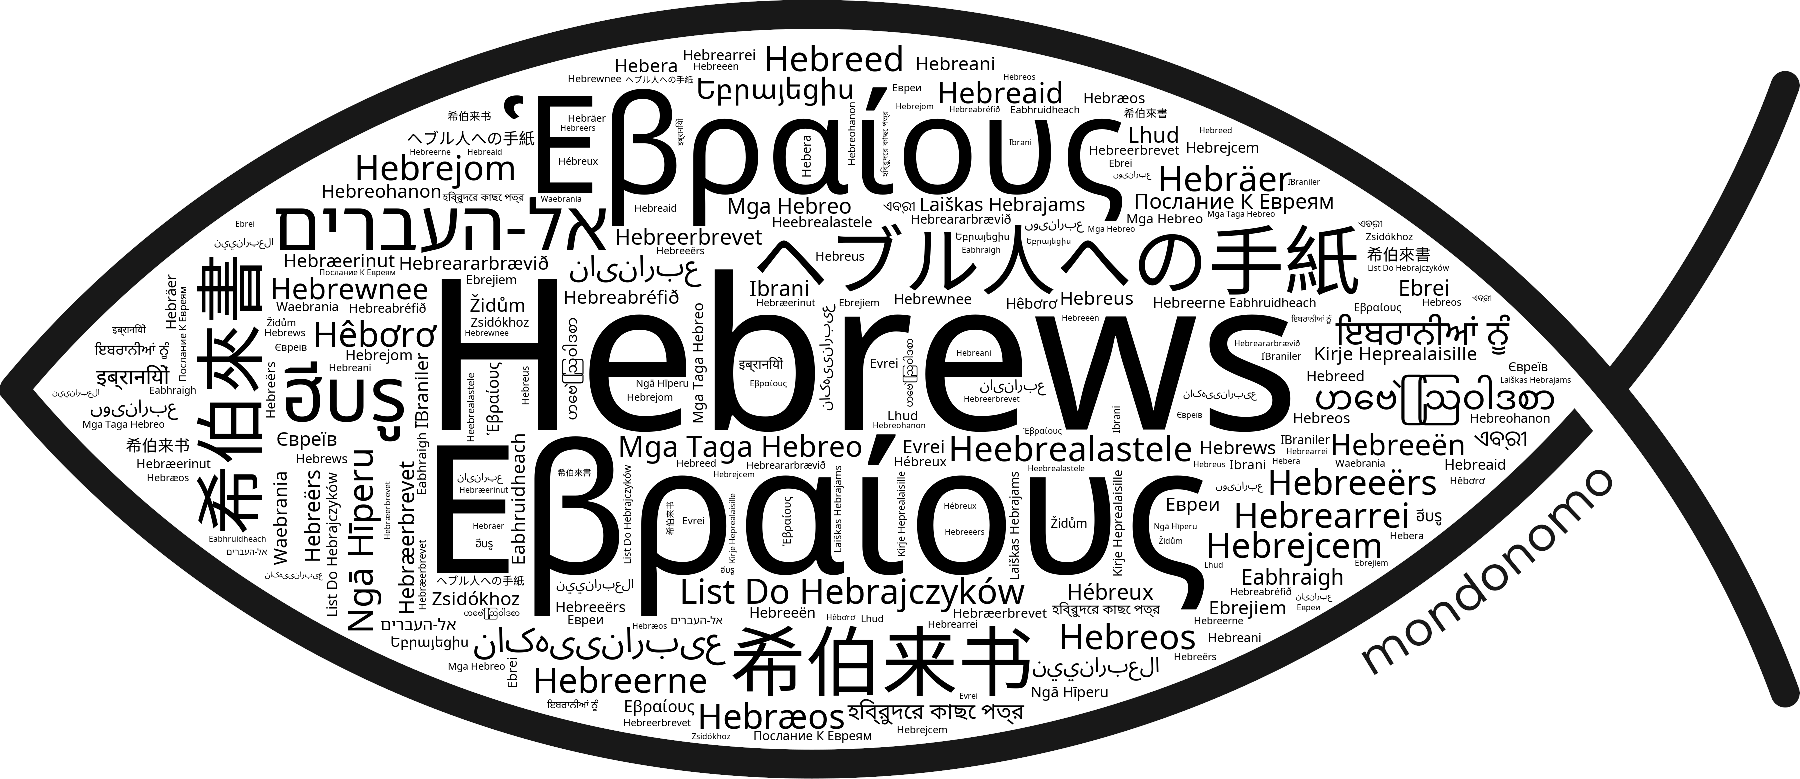 Name Hebrews in the world's Bibles